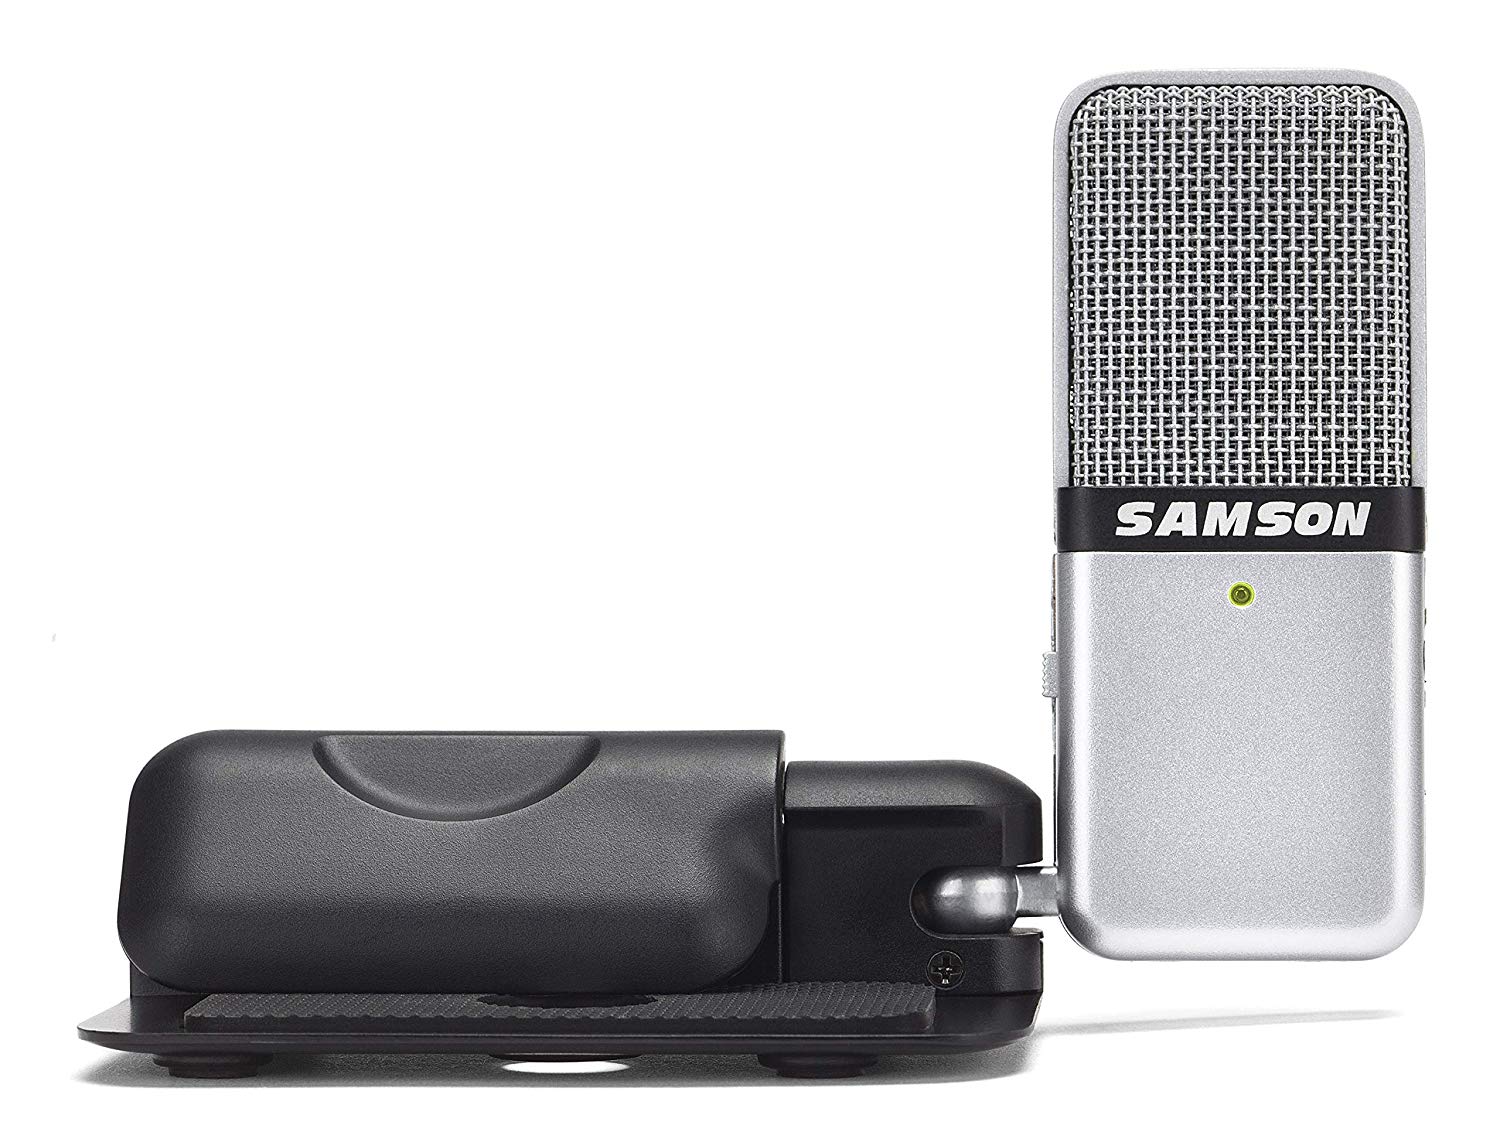 best microphone for podcasting mac